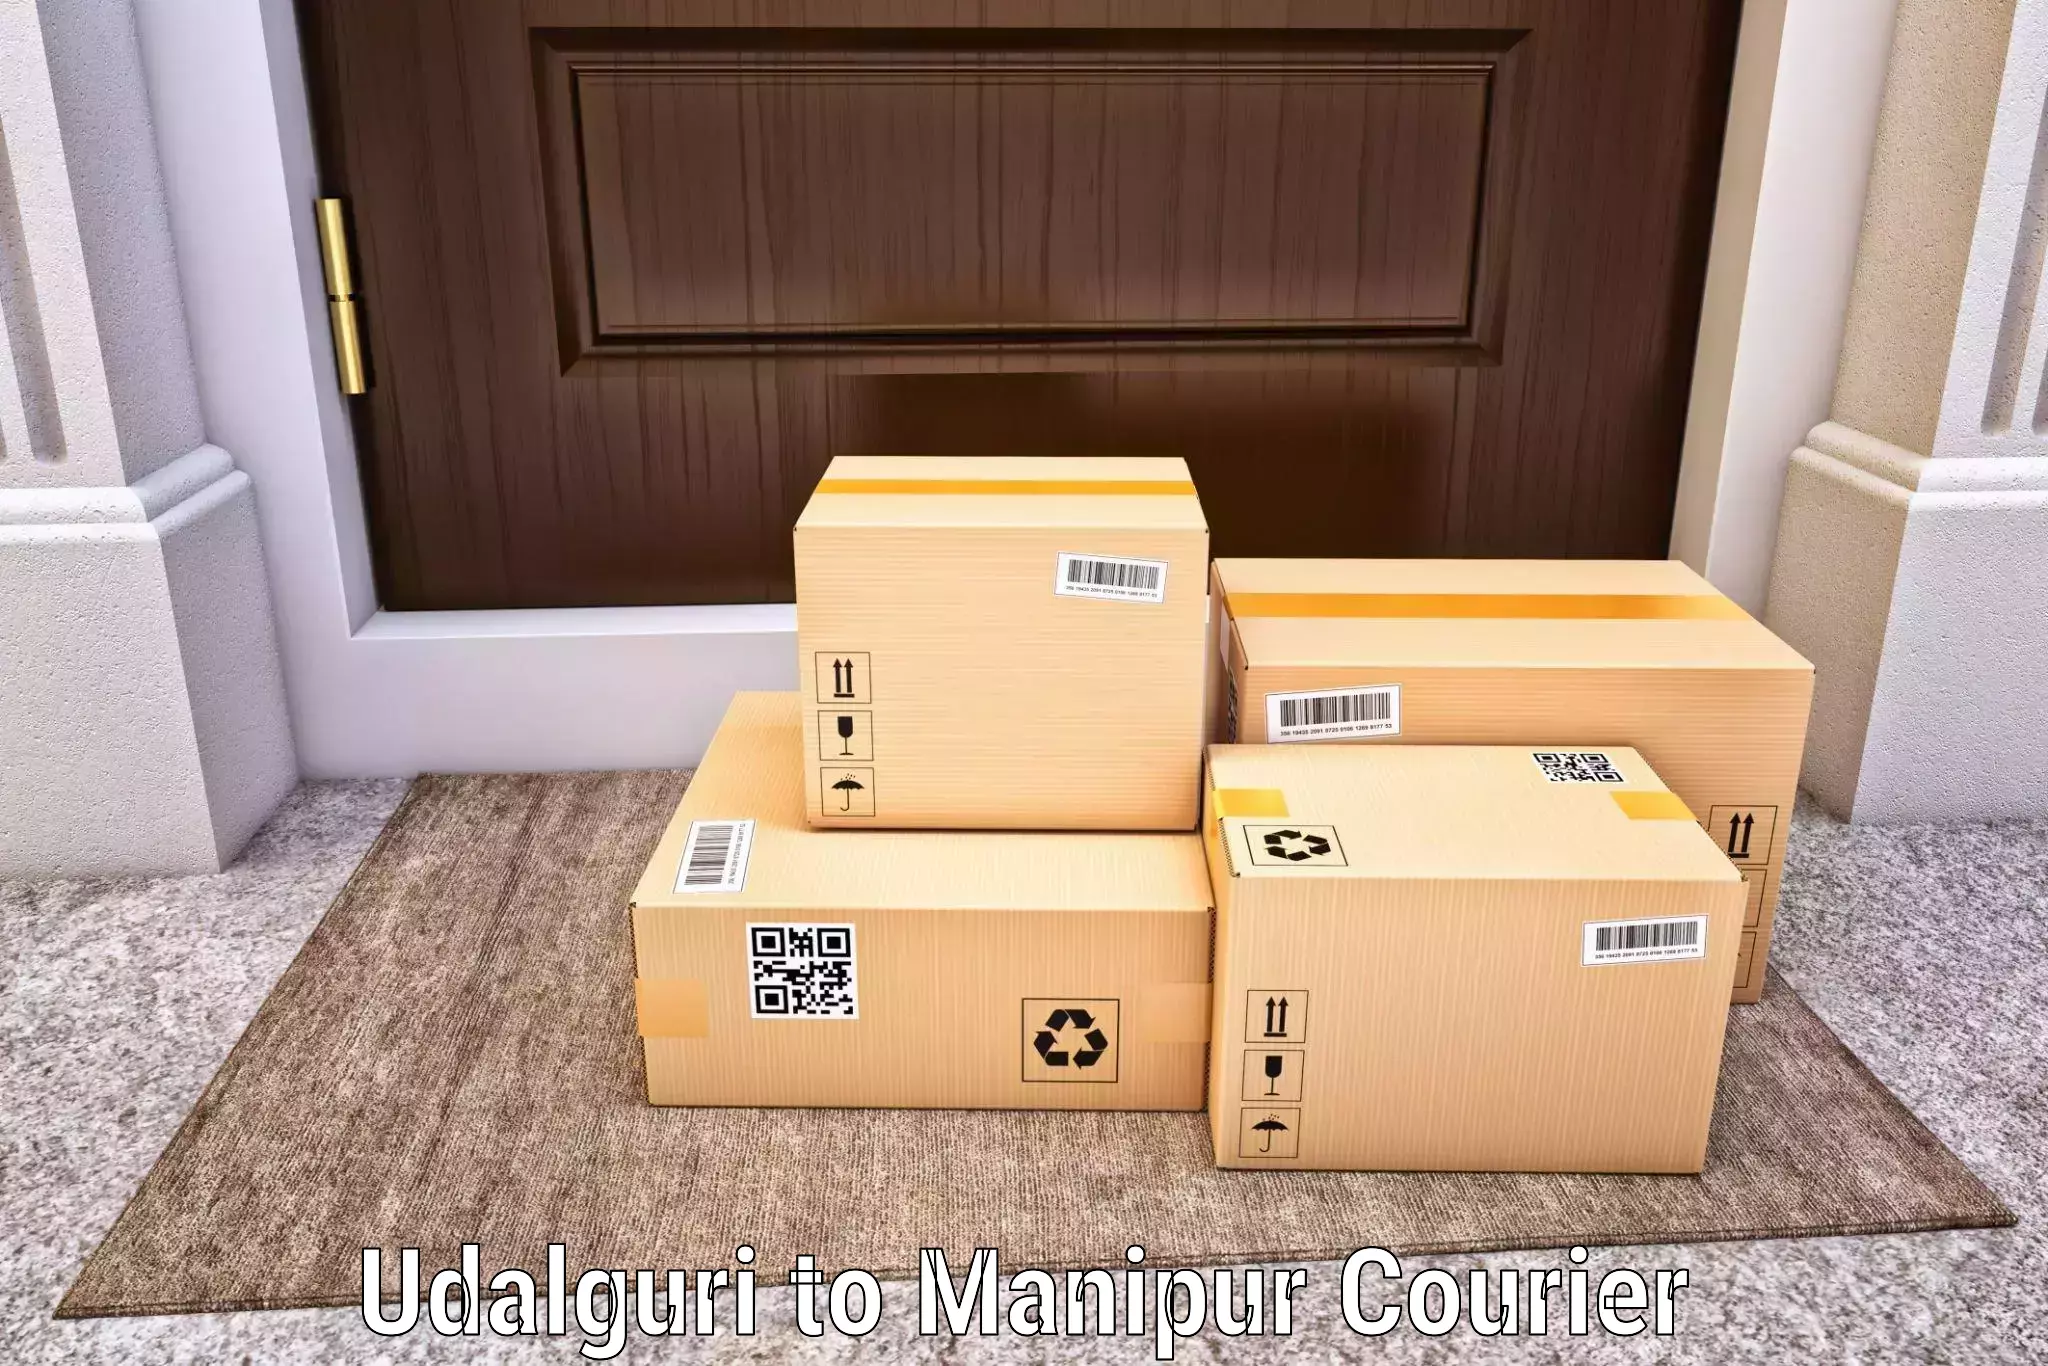 State-of-the-art courier technology Udalguri to Kakching